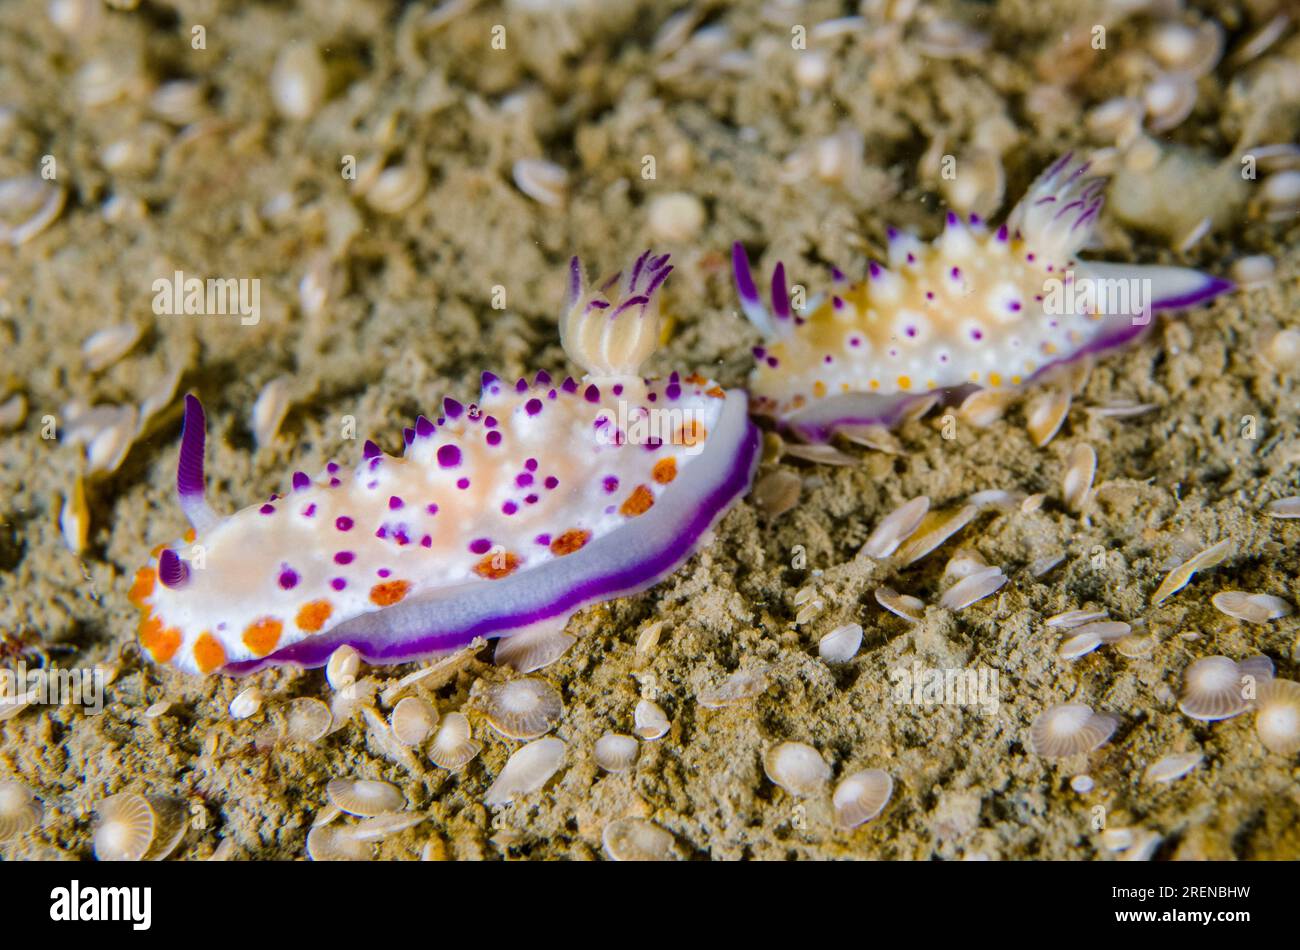 Pair of Multi-pustuled Mexichromis Nudibranch, Mexichromis multituberculata, tailing each other on sand with Foraminifera shells, Foraminifera Infraph Stock Photo